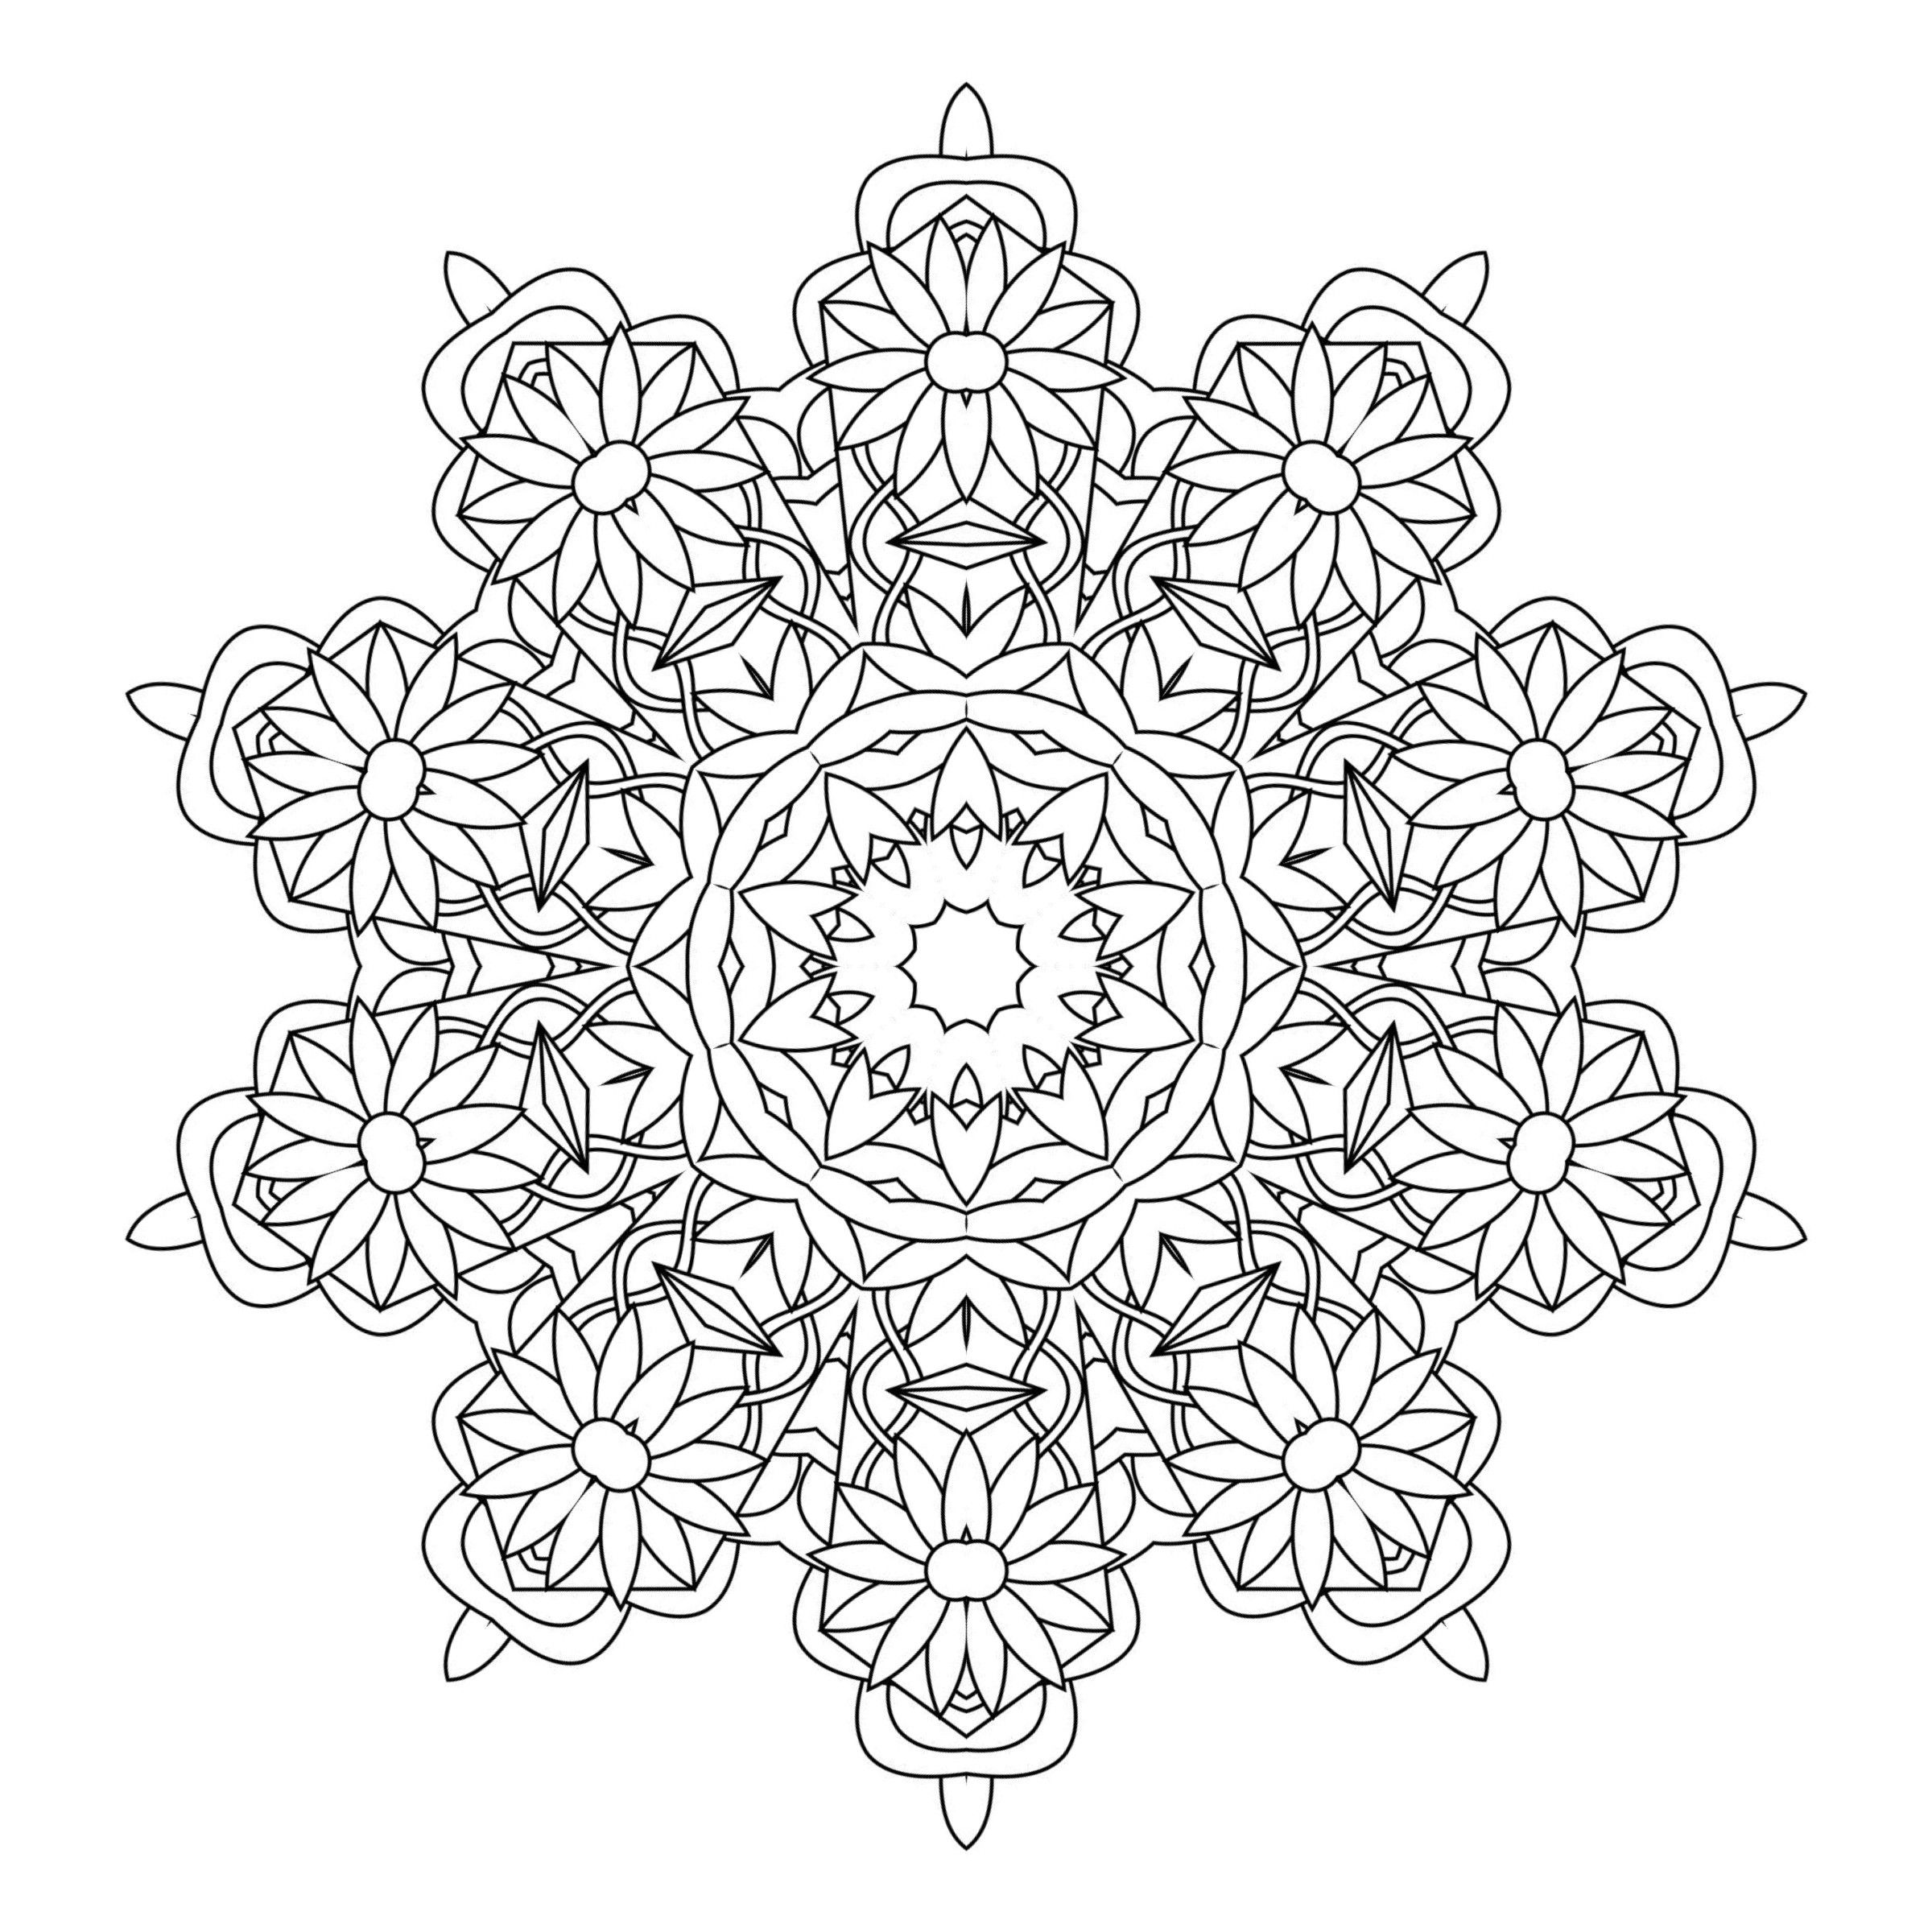 kaleidoscope-coloring-pages-for-adults-2.jpg